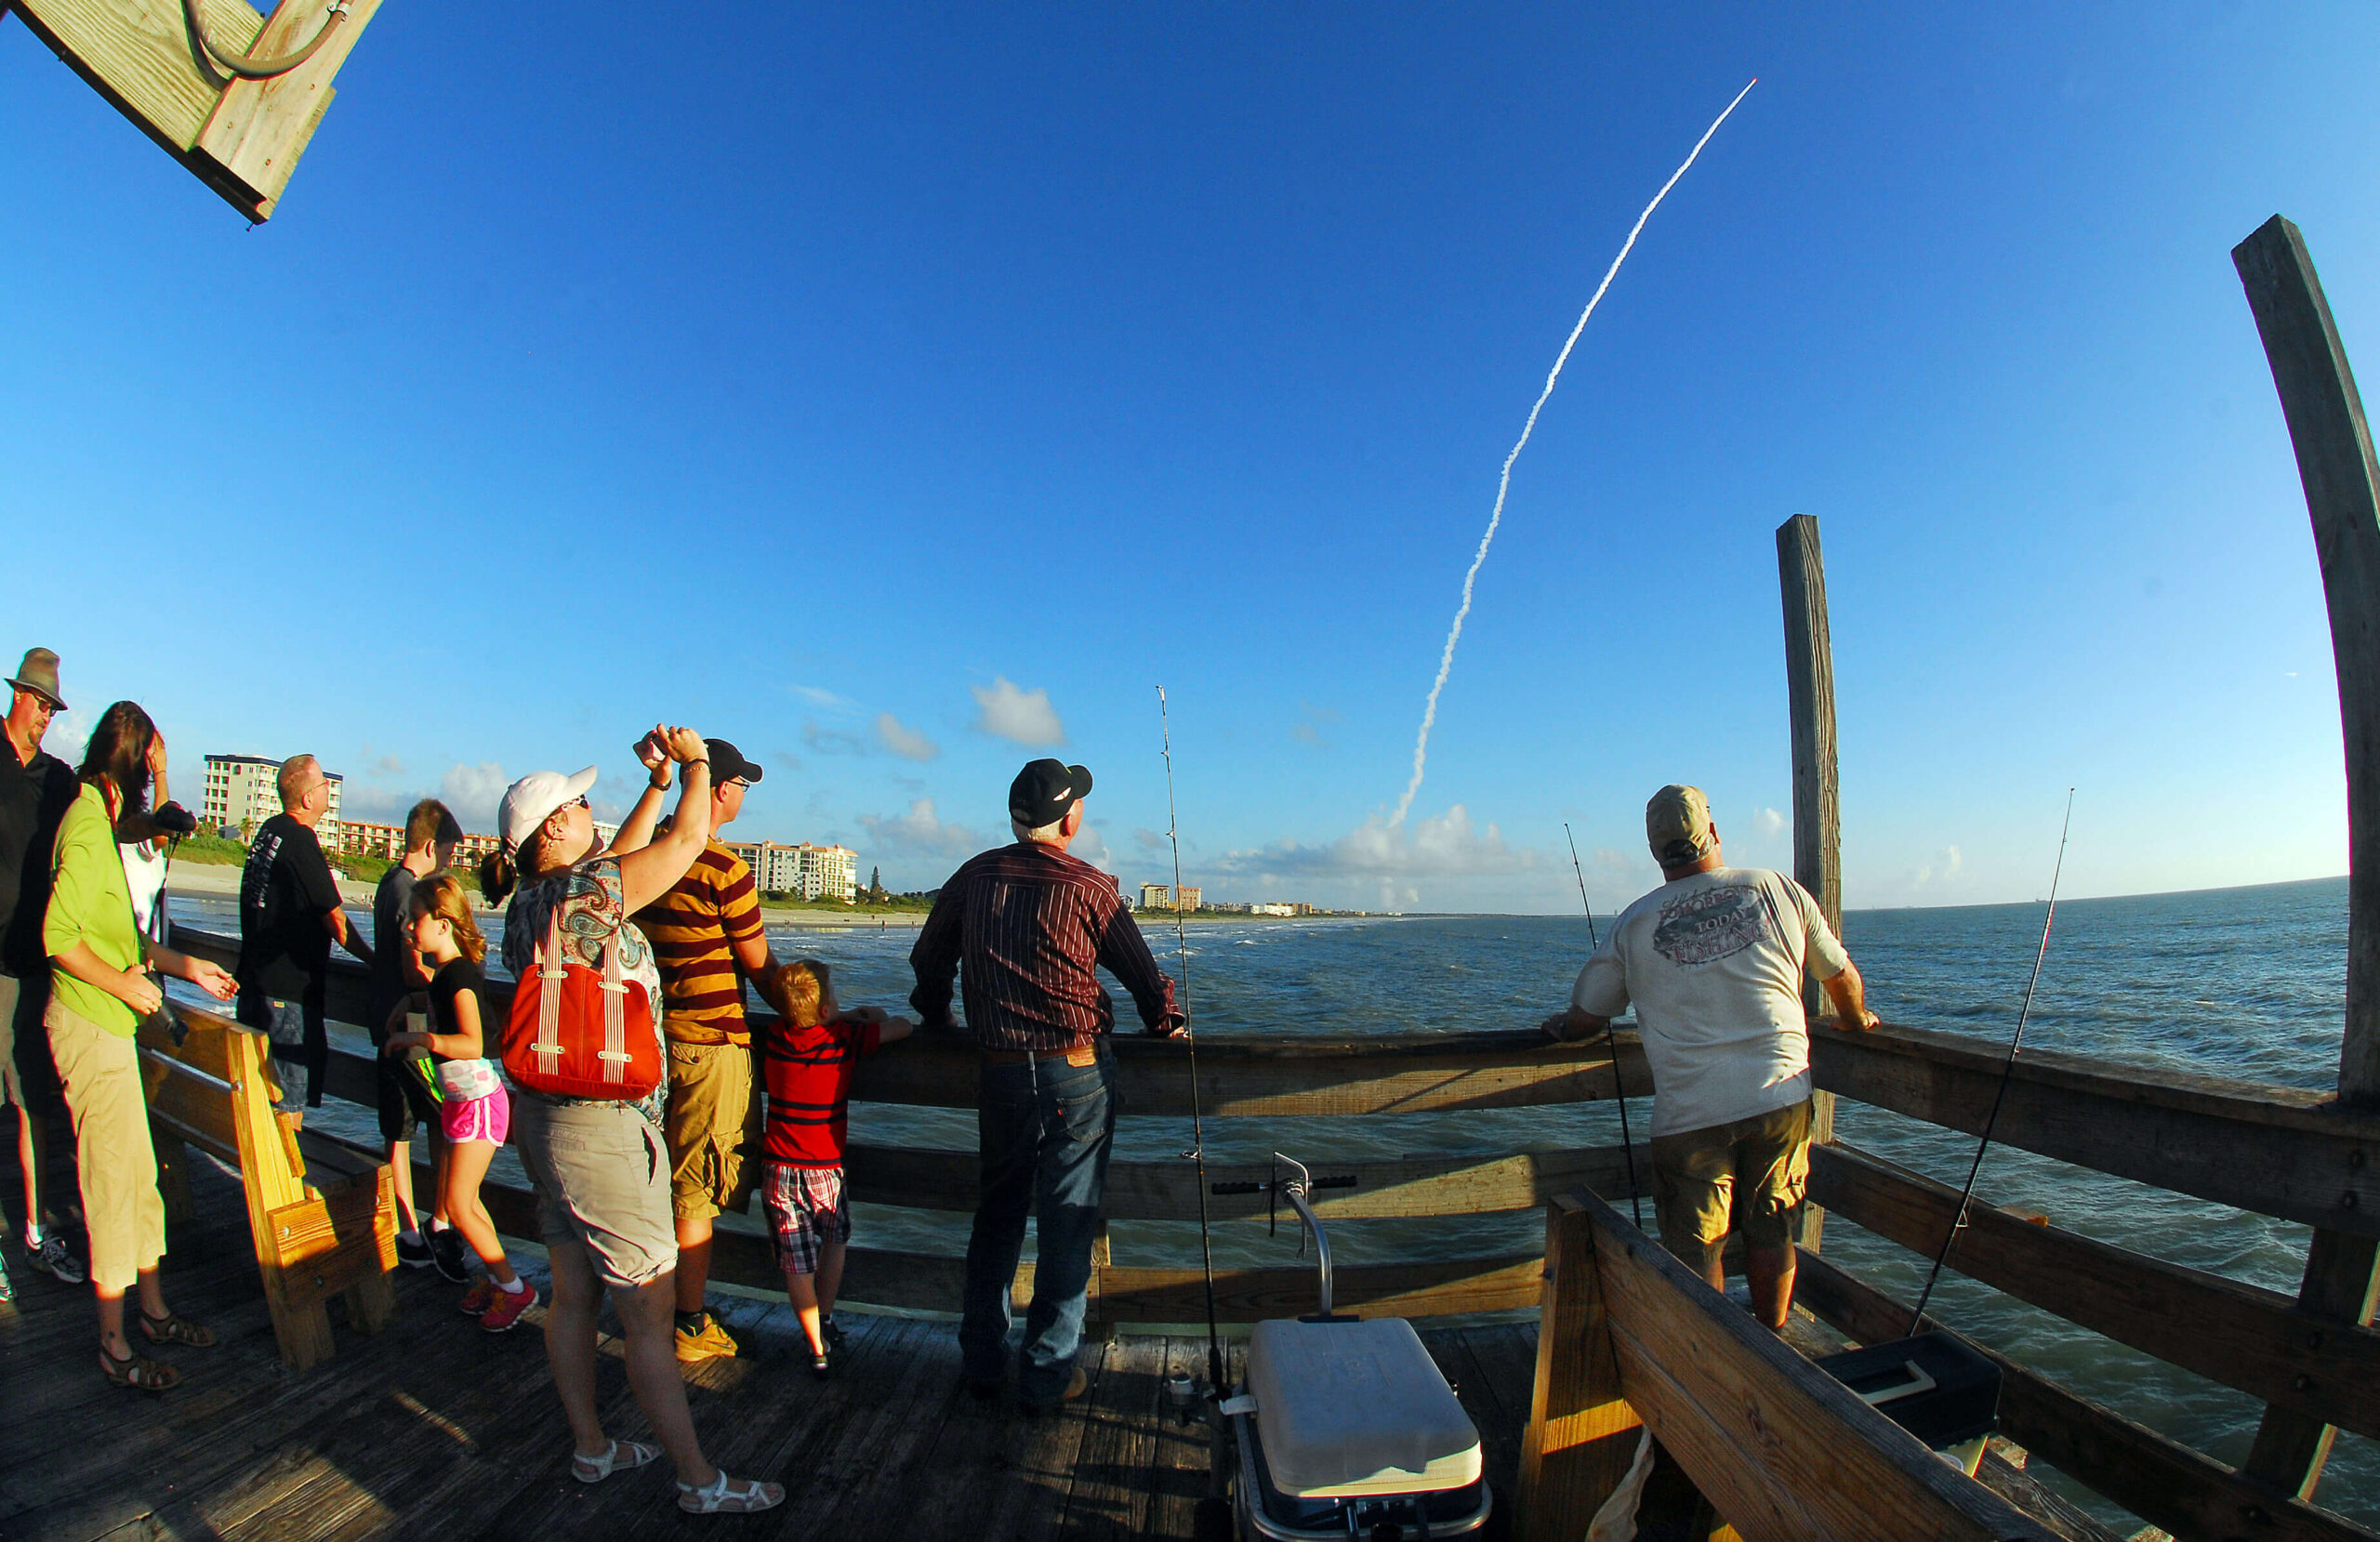 People watch a rocket launch from the pier